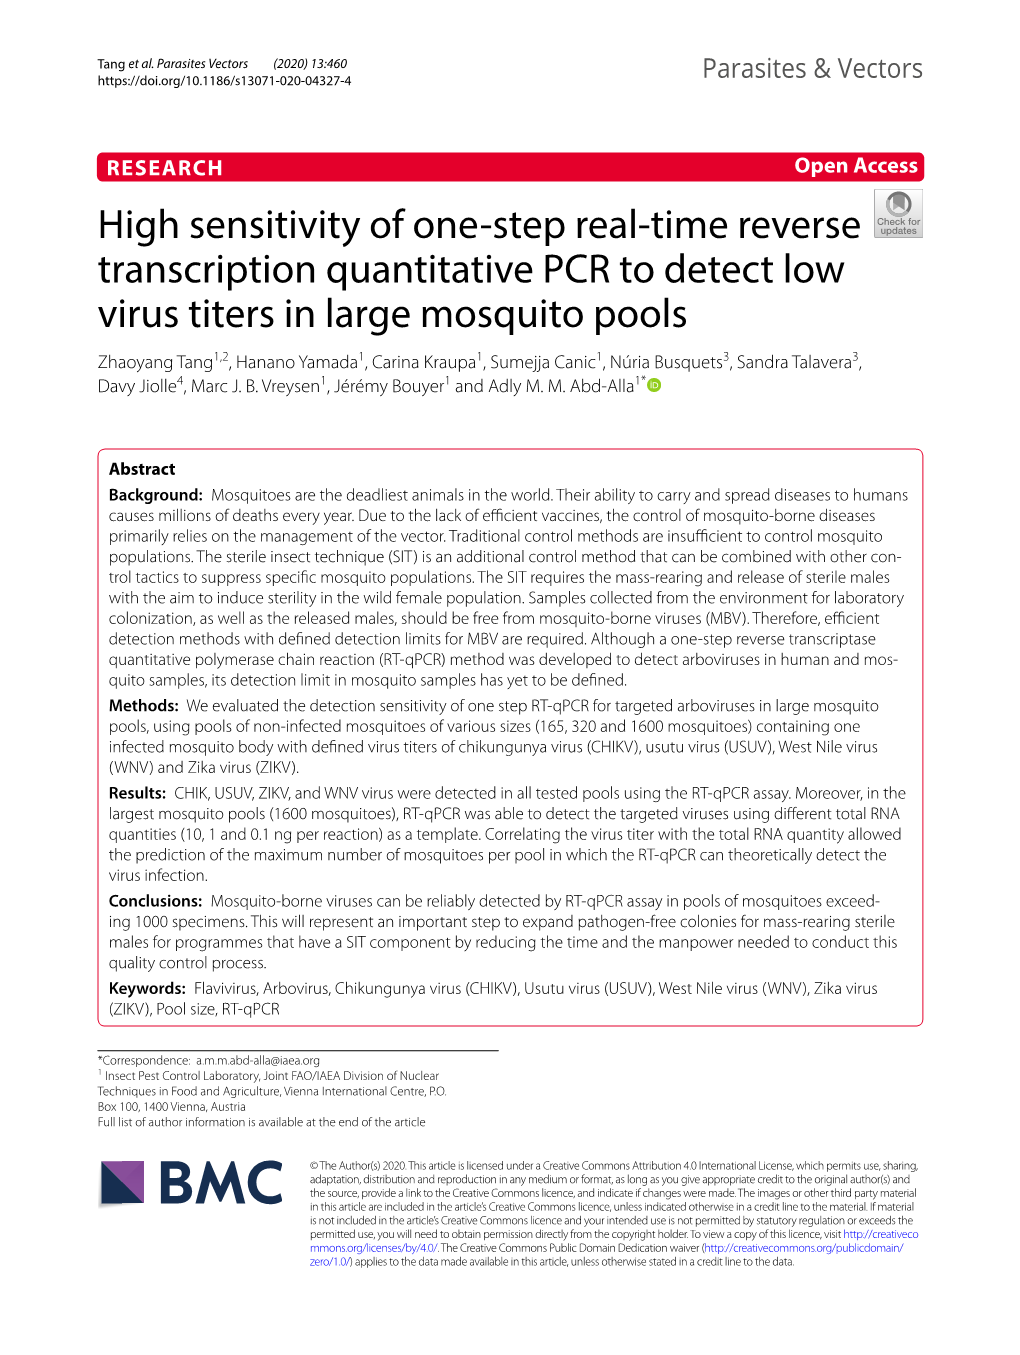 High Sensitivity of One-Step Real-Time Reverse Transcription Quantitative PCR to Detect Low Virus Titers in Large Mosquito Pools